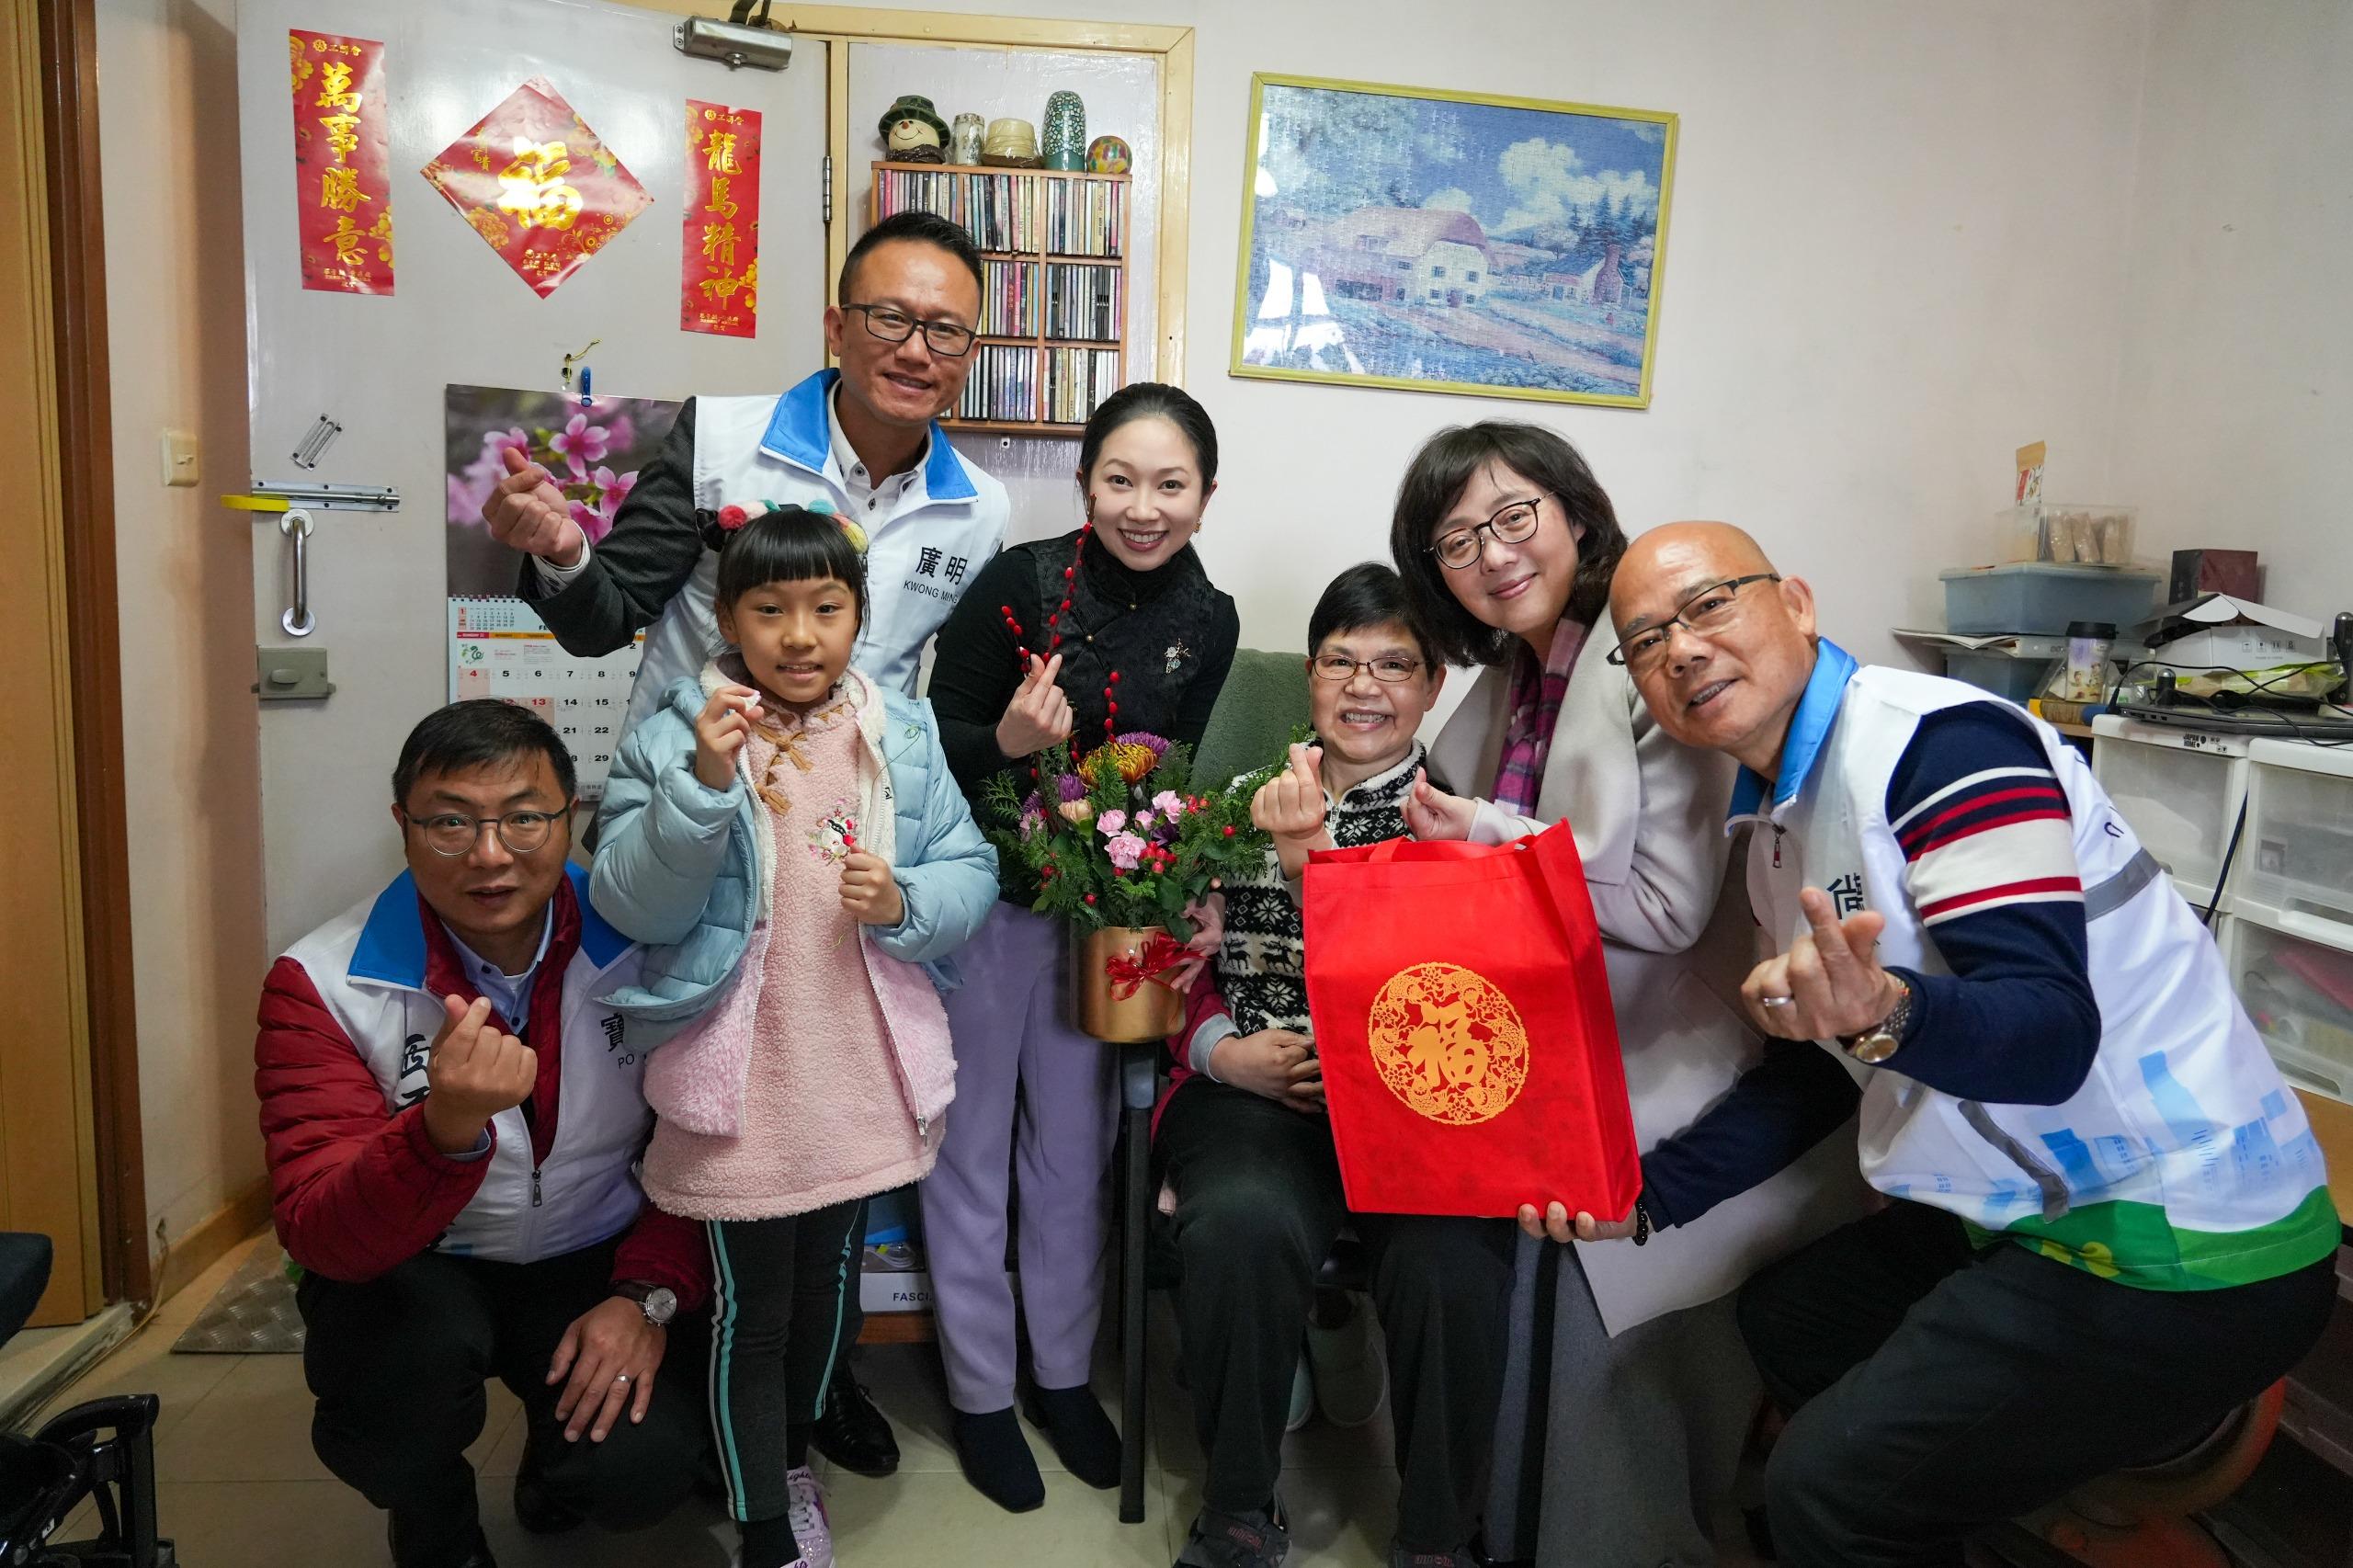 The Secretary for Development, Ms Bernadette Linn (second right), accompanied by the District Officer (Sai Kung), Miss Kathy Ma (centre), and Sai Kung District Council members and representatives from the Care Team (Sai Kung), today (February 8) visited and extended festive greetings to households at Sheung Tak Estate, Tseung Kwan O. Photo shows Ms Linn presenting a Chinese New Year blessing bag and a floral decoration to an elderly person.